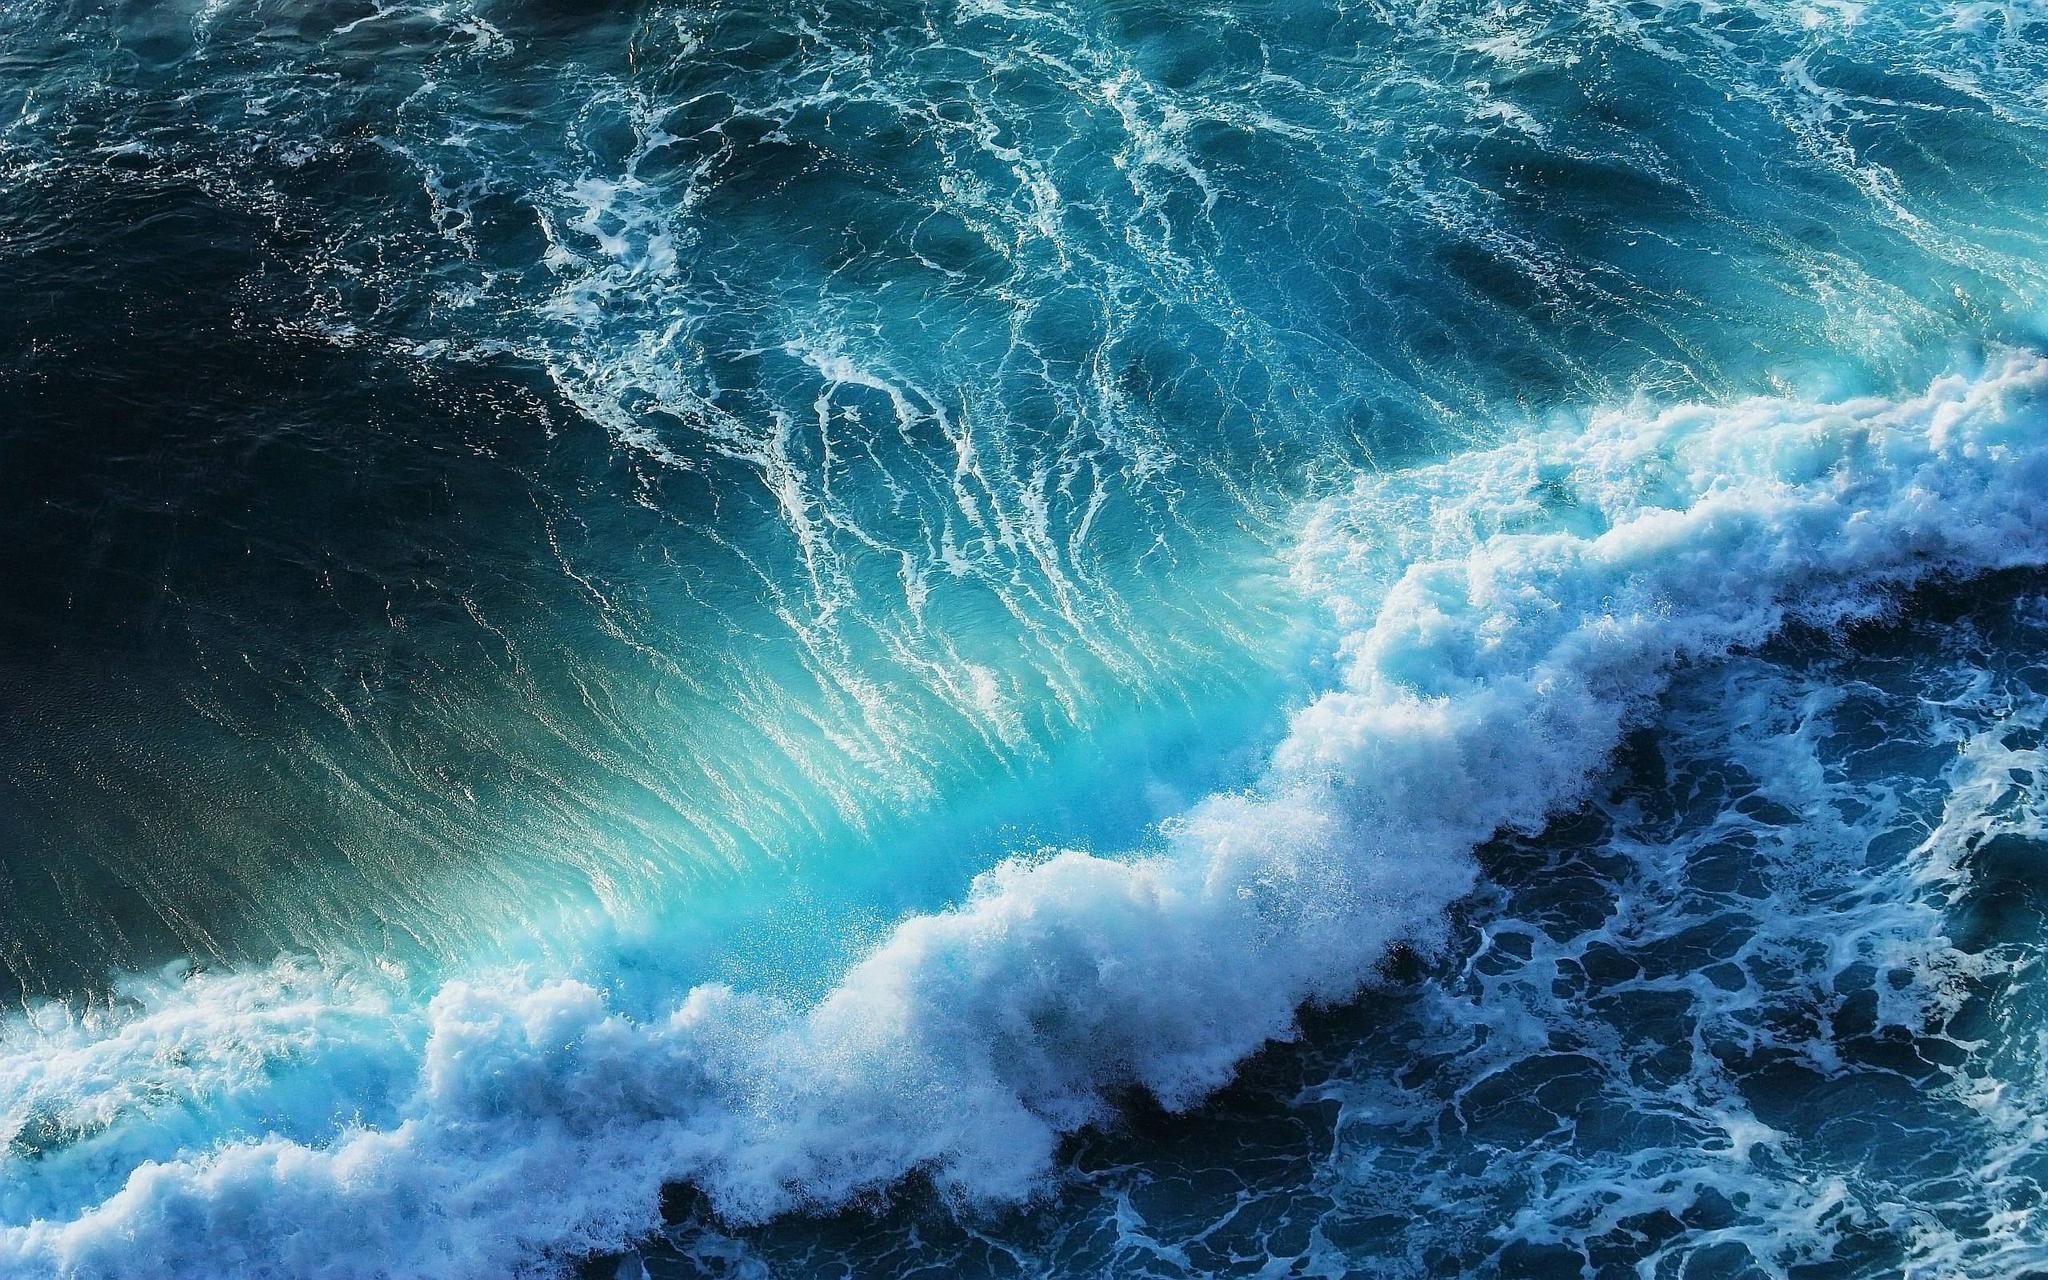 2048x1280 9 Awesome Wave Wallpapers to Decorate Backgrounds Like an Apple .